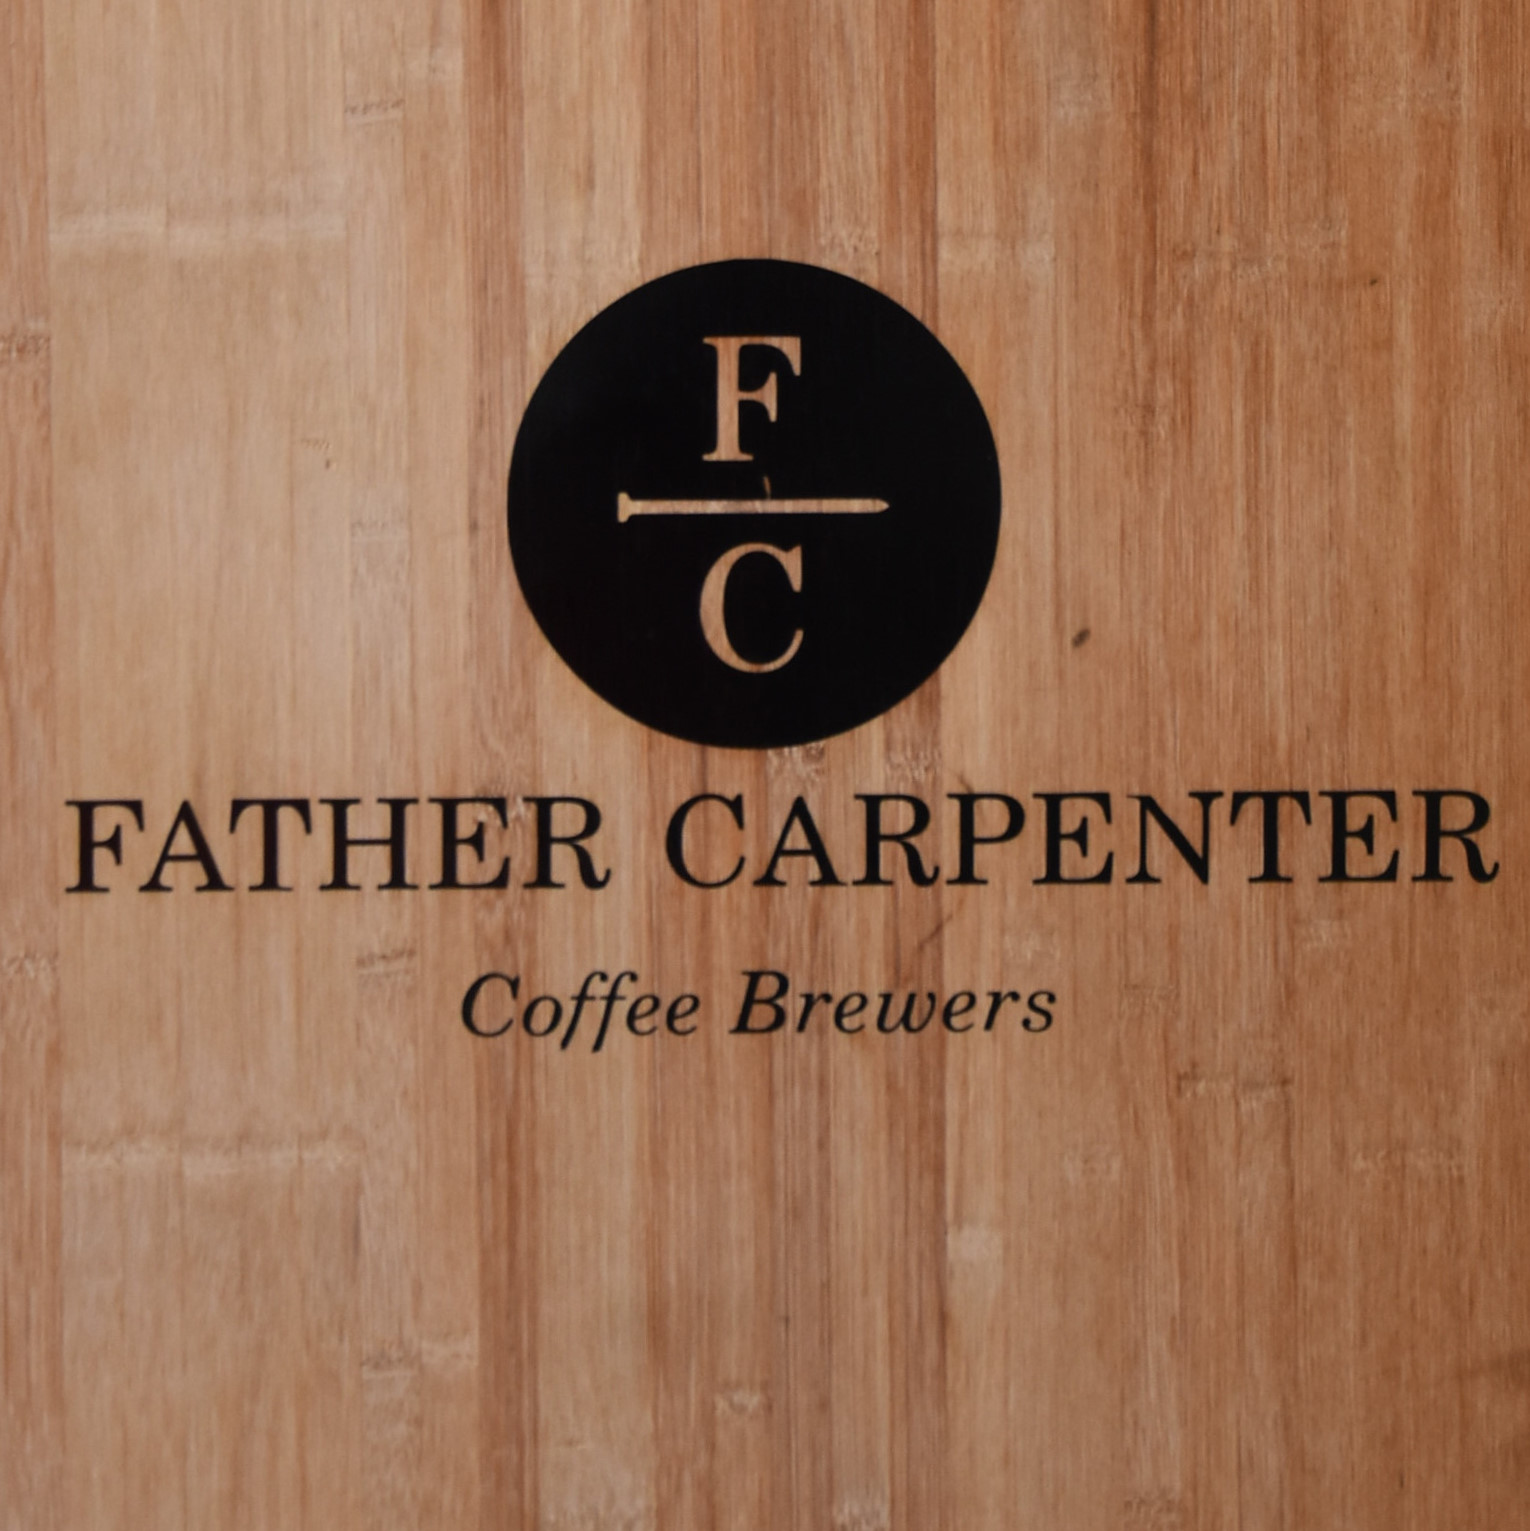 The name board for Father Carpenter, Coffee Brewers, in Berlin.